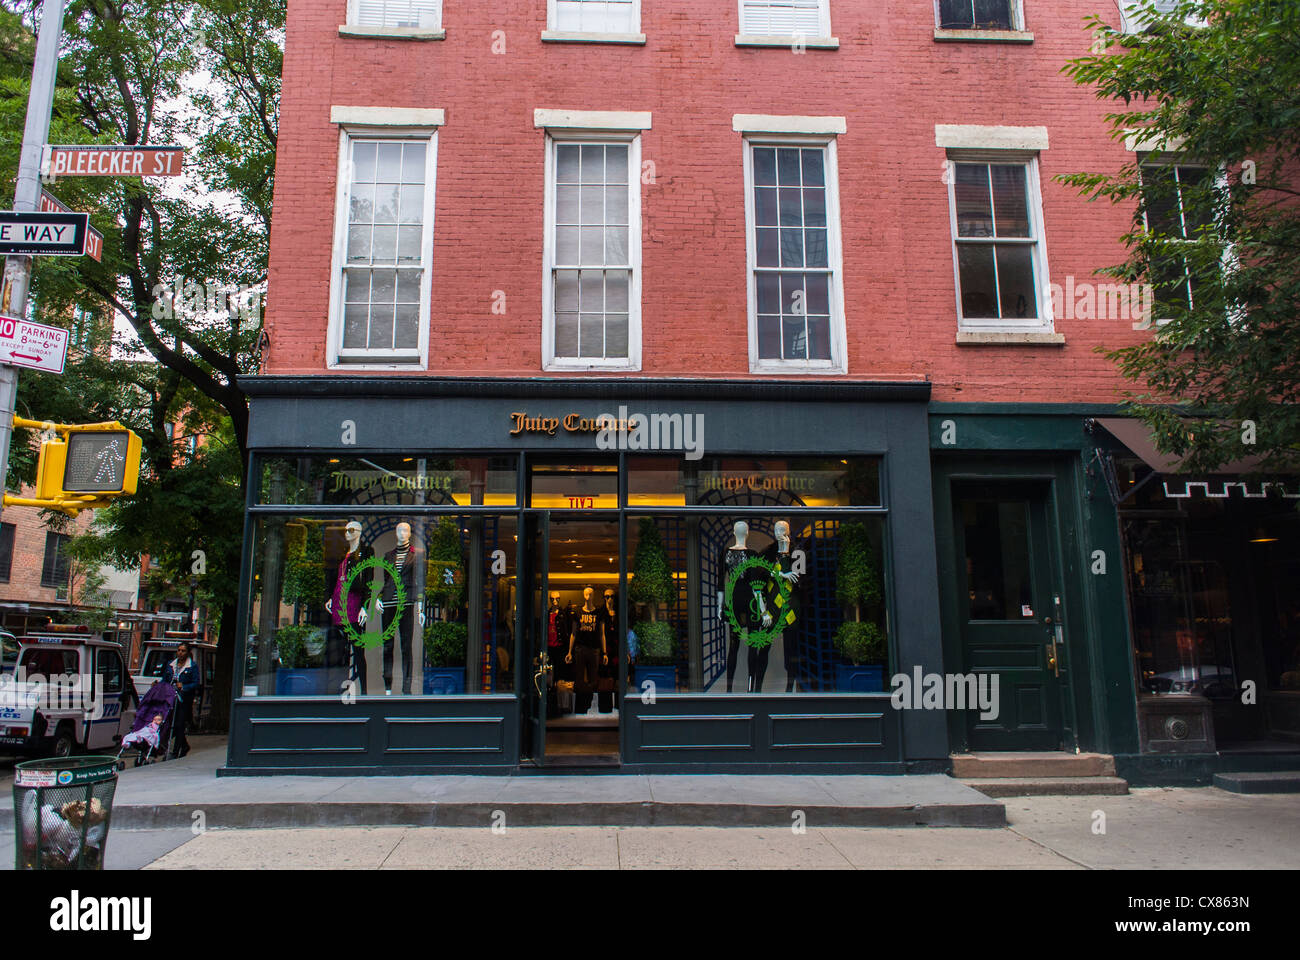 New York City, NY, USA, Street Scenes, Building Façade, Fashion Shop Fronts, Shopping in Greenwich Village Stock Photo